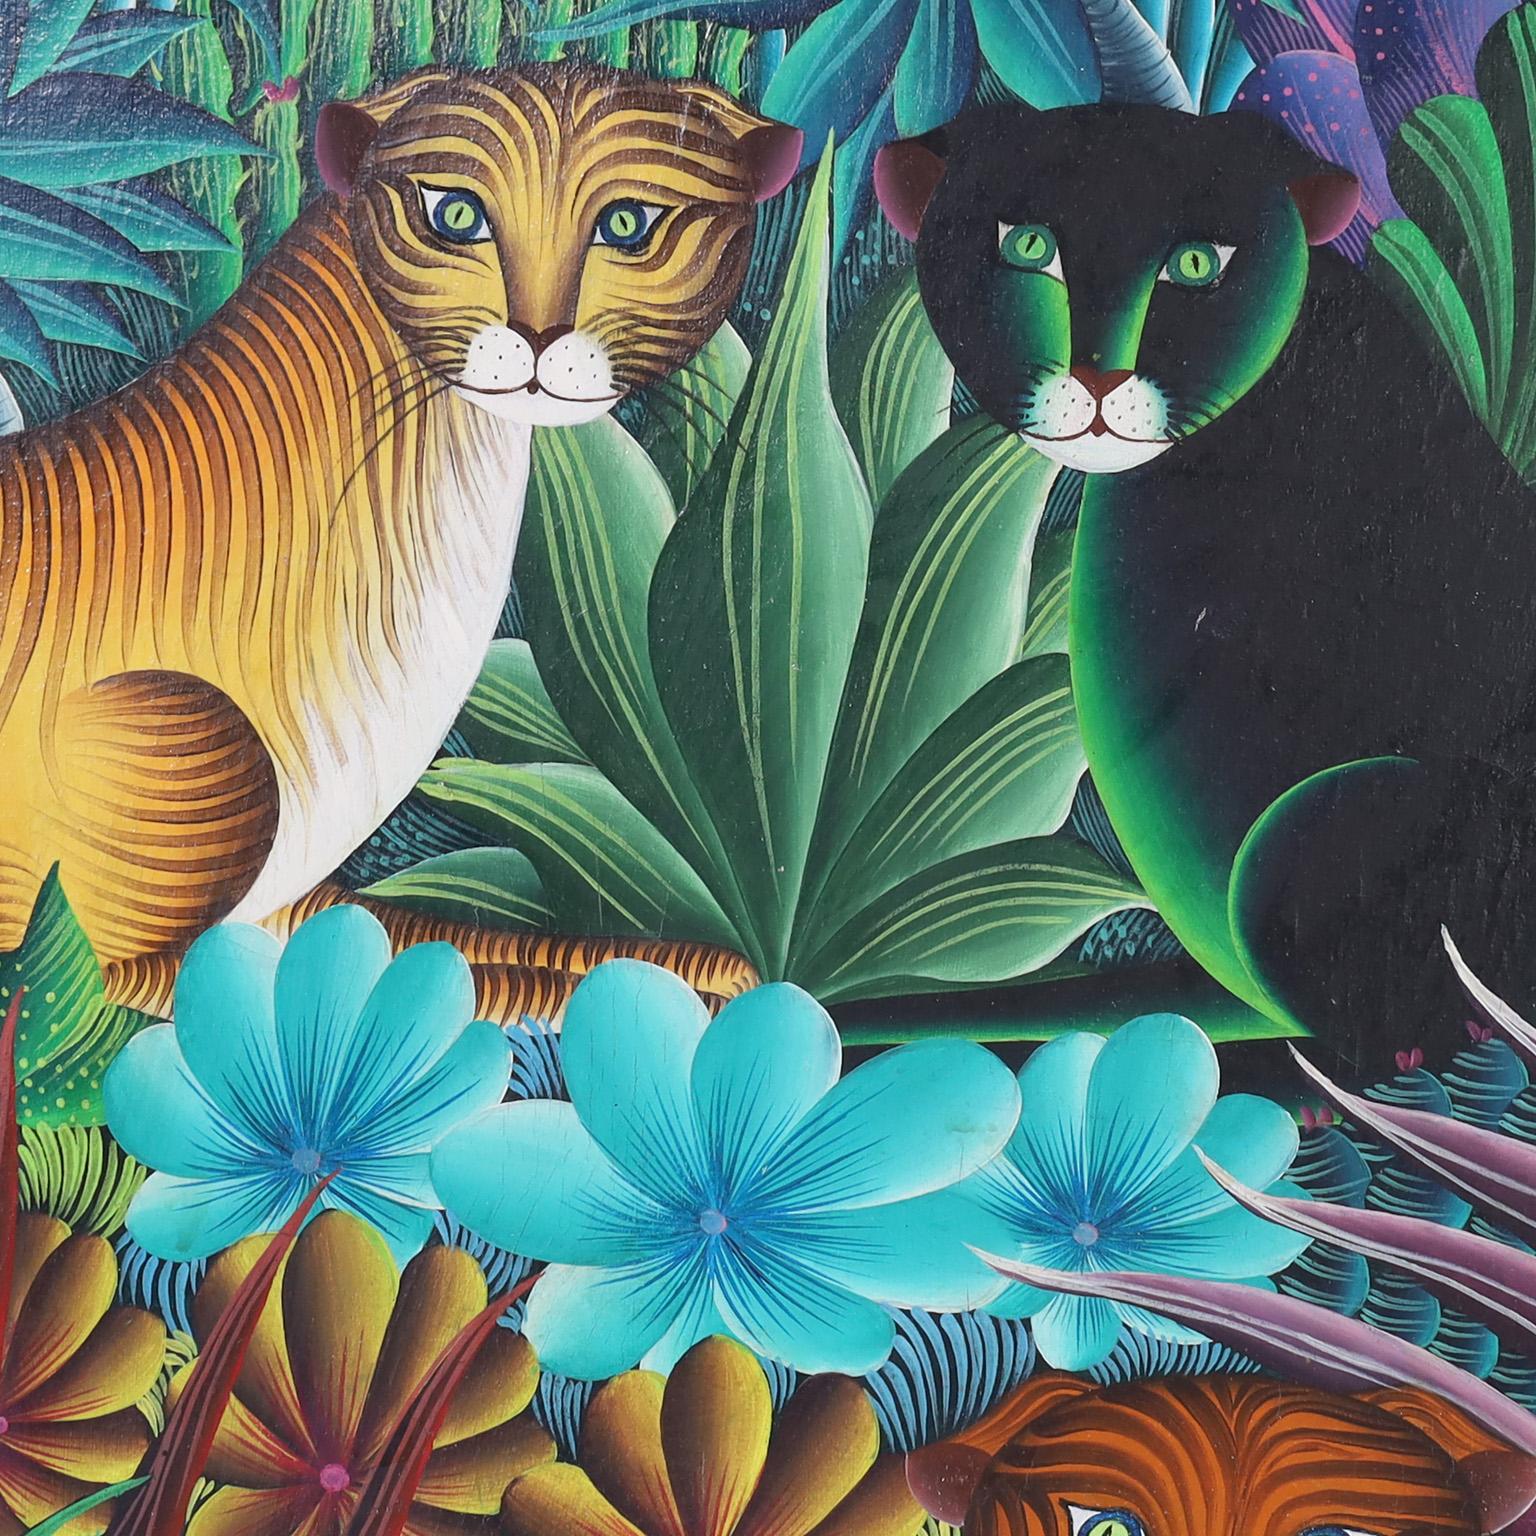 Hand-Painted Painting on Canvas of Cats in a Jungle For Sale